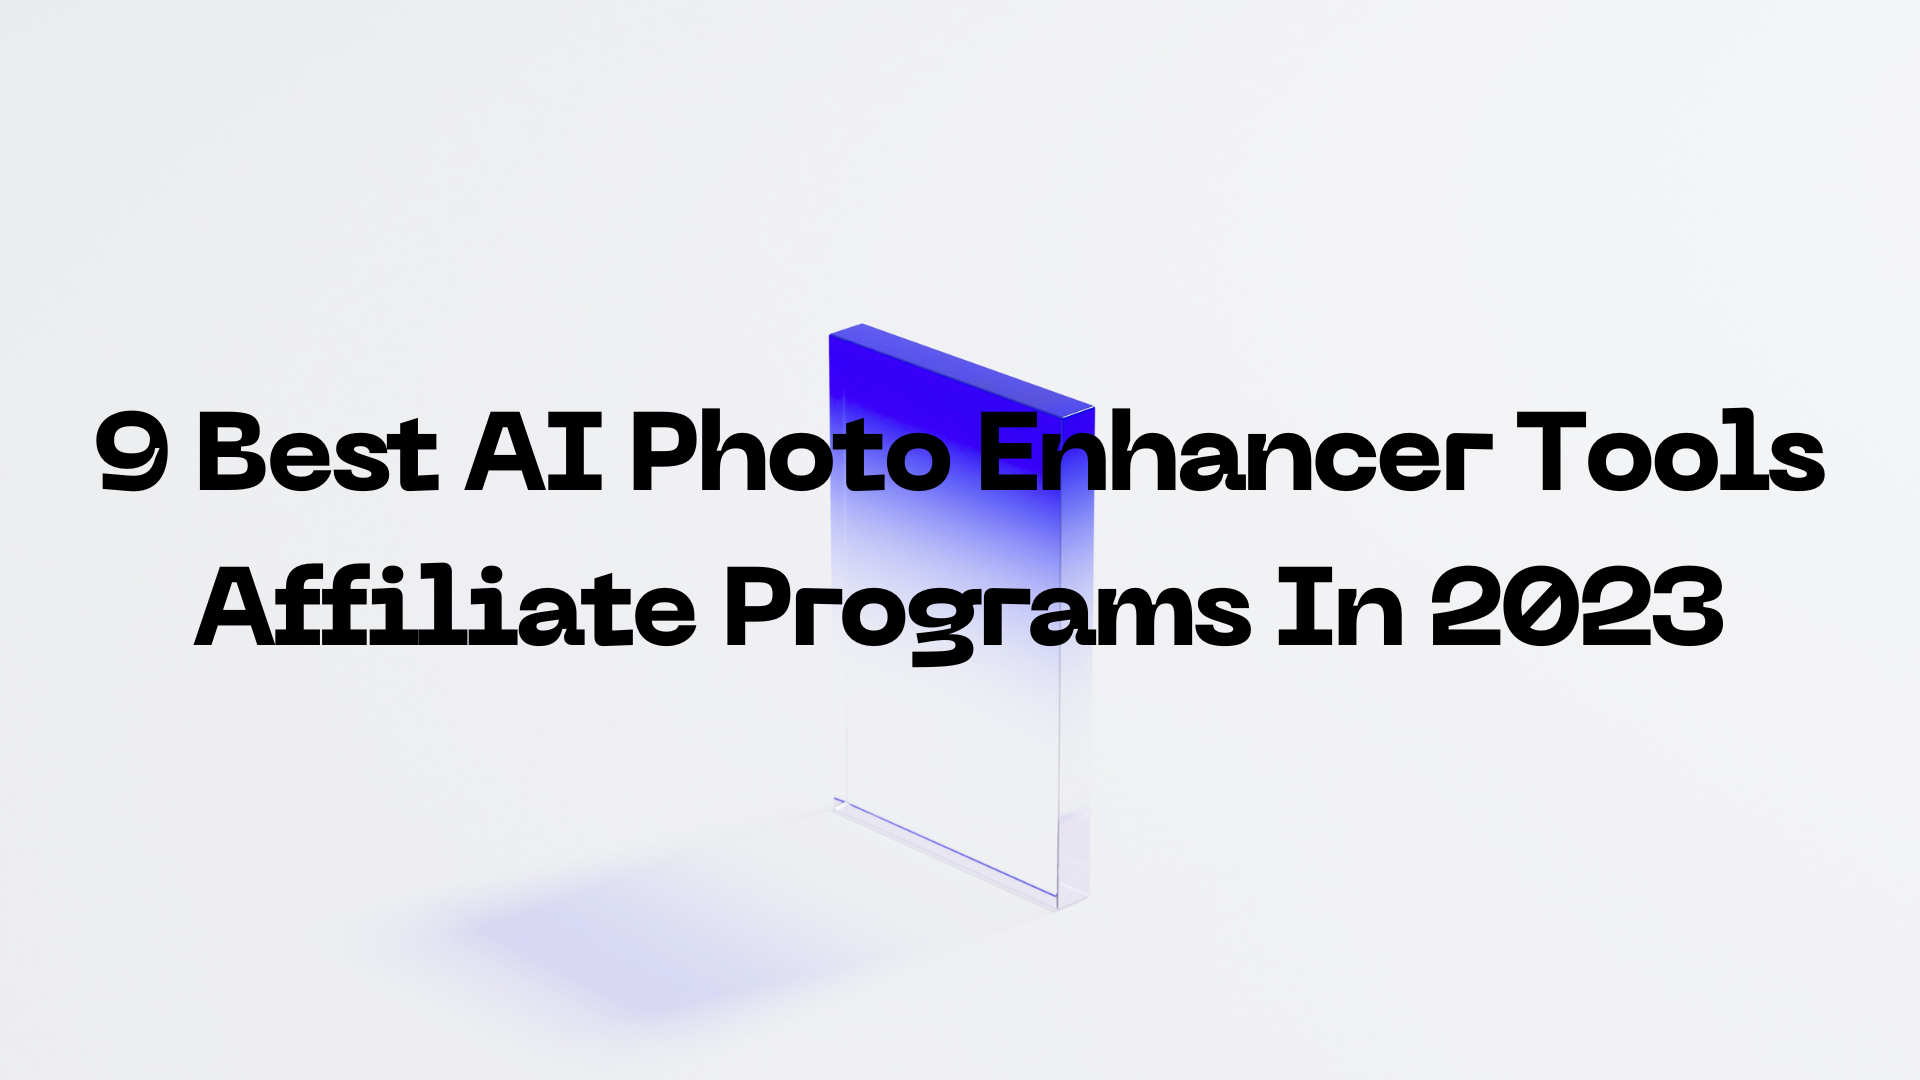 9 Best AI Photo Enhancer Tools Affiliate Programs In 2023